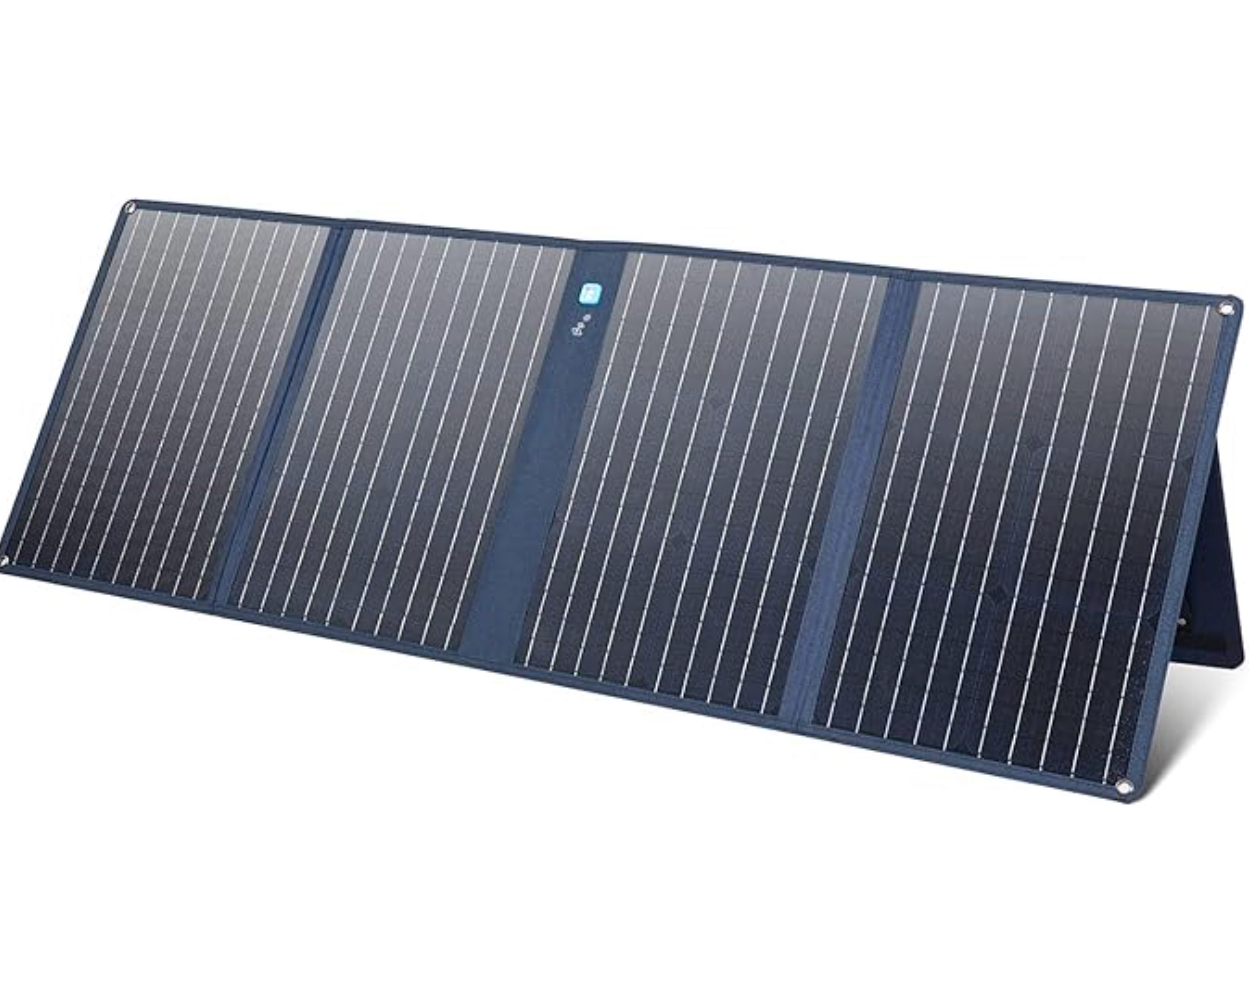 Anker 625 solar panel charger. 